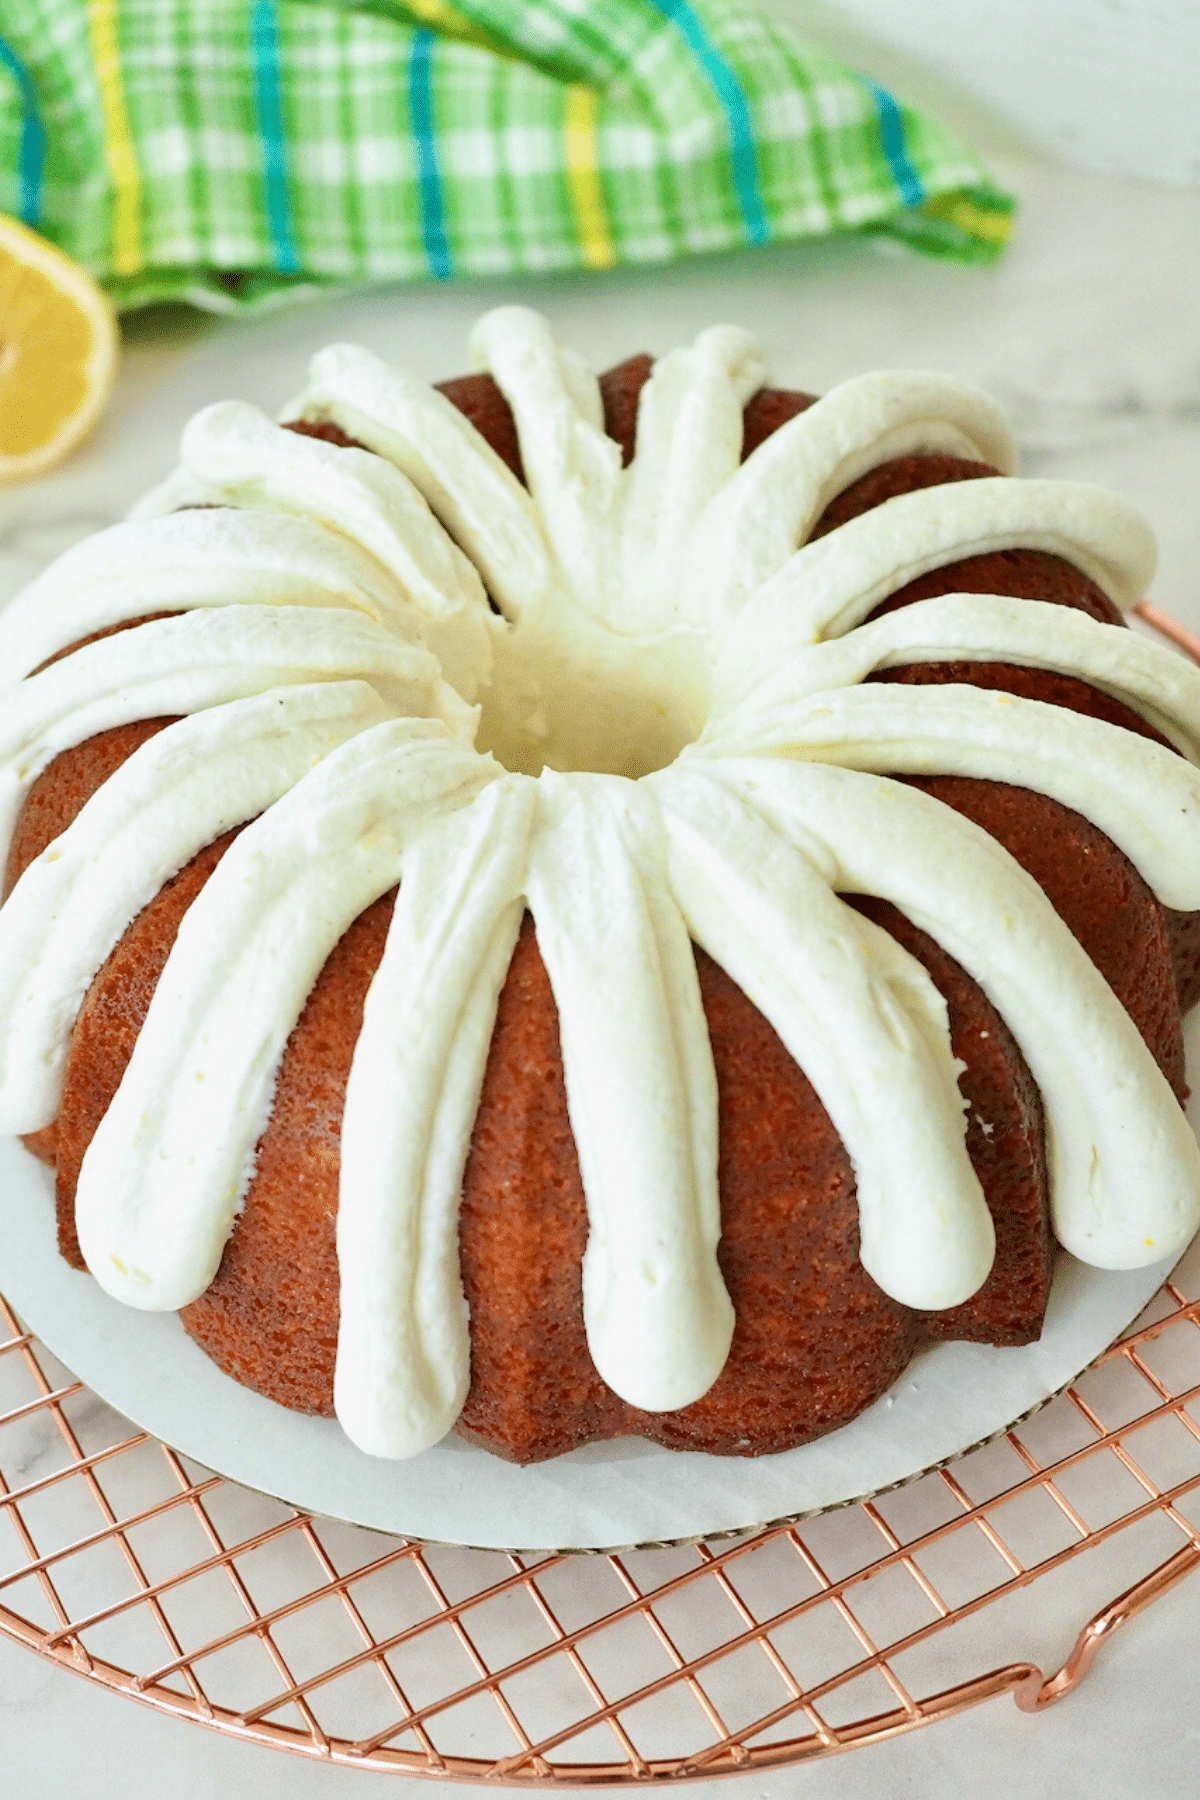 Lemon Bundt Cake with cream cheese frosting on cardboard on wire rack.